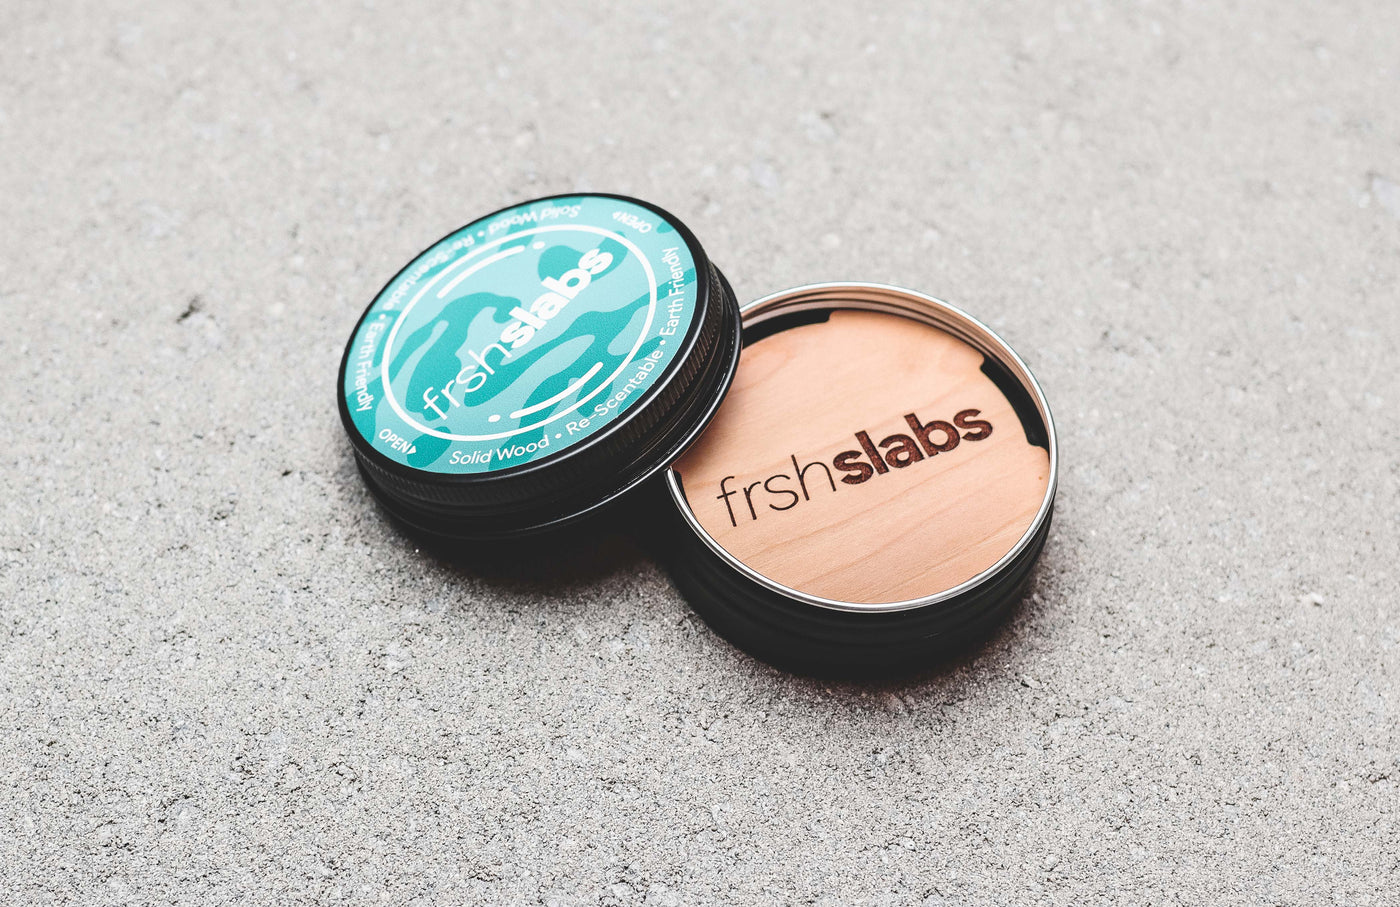 Frshslabs Puck - Limited Edition